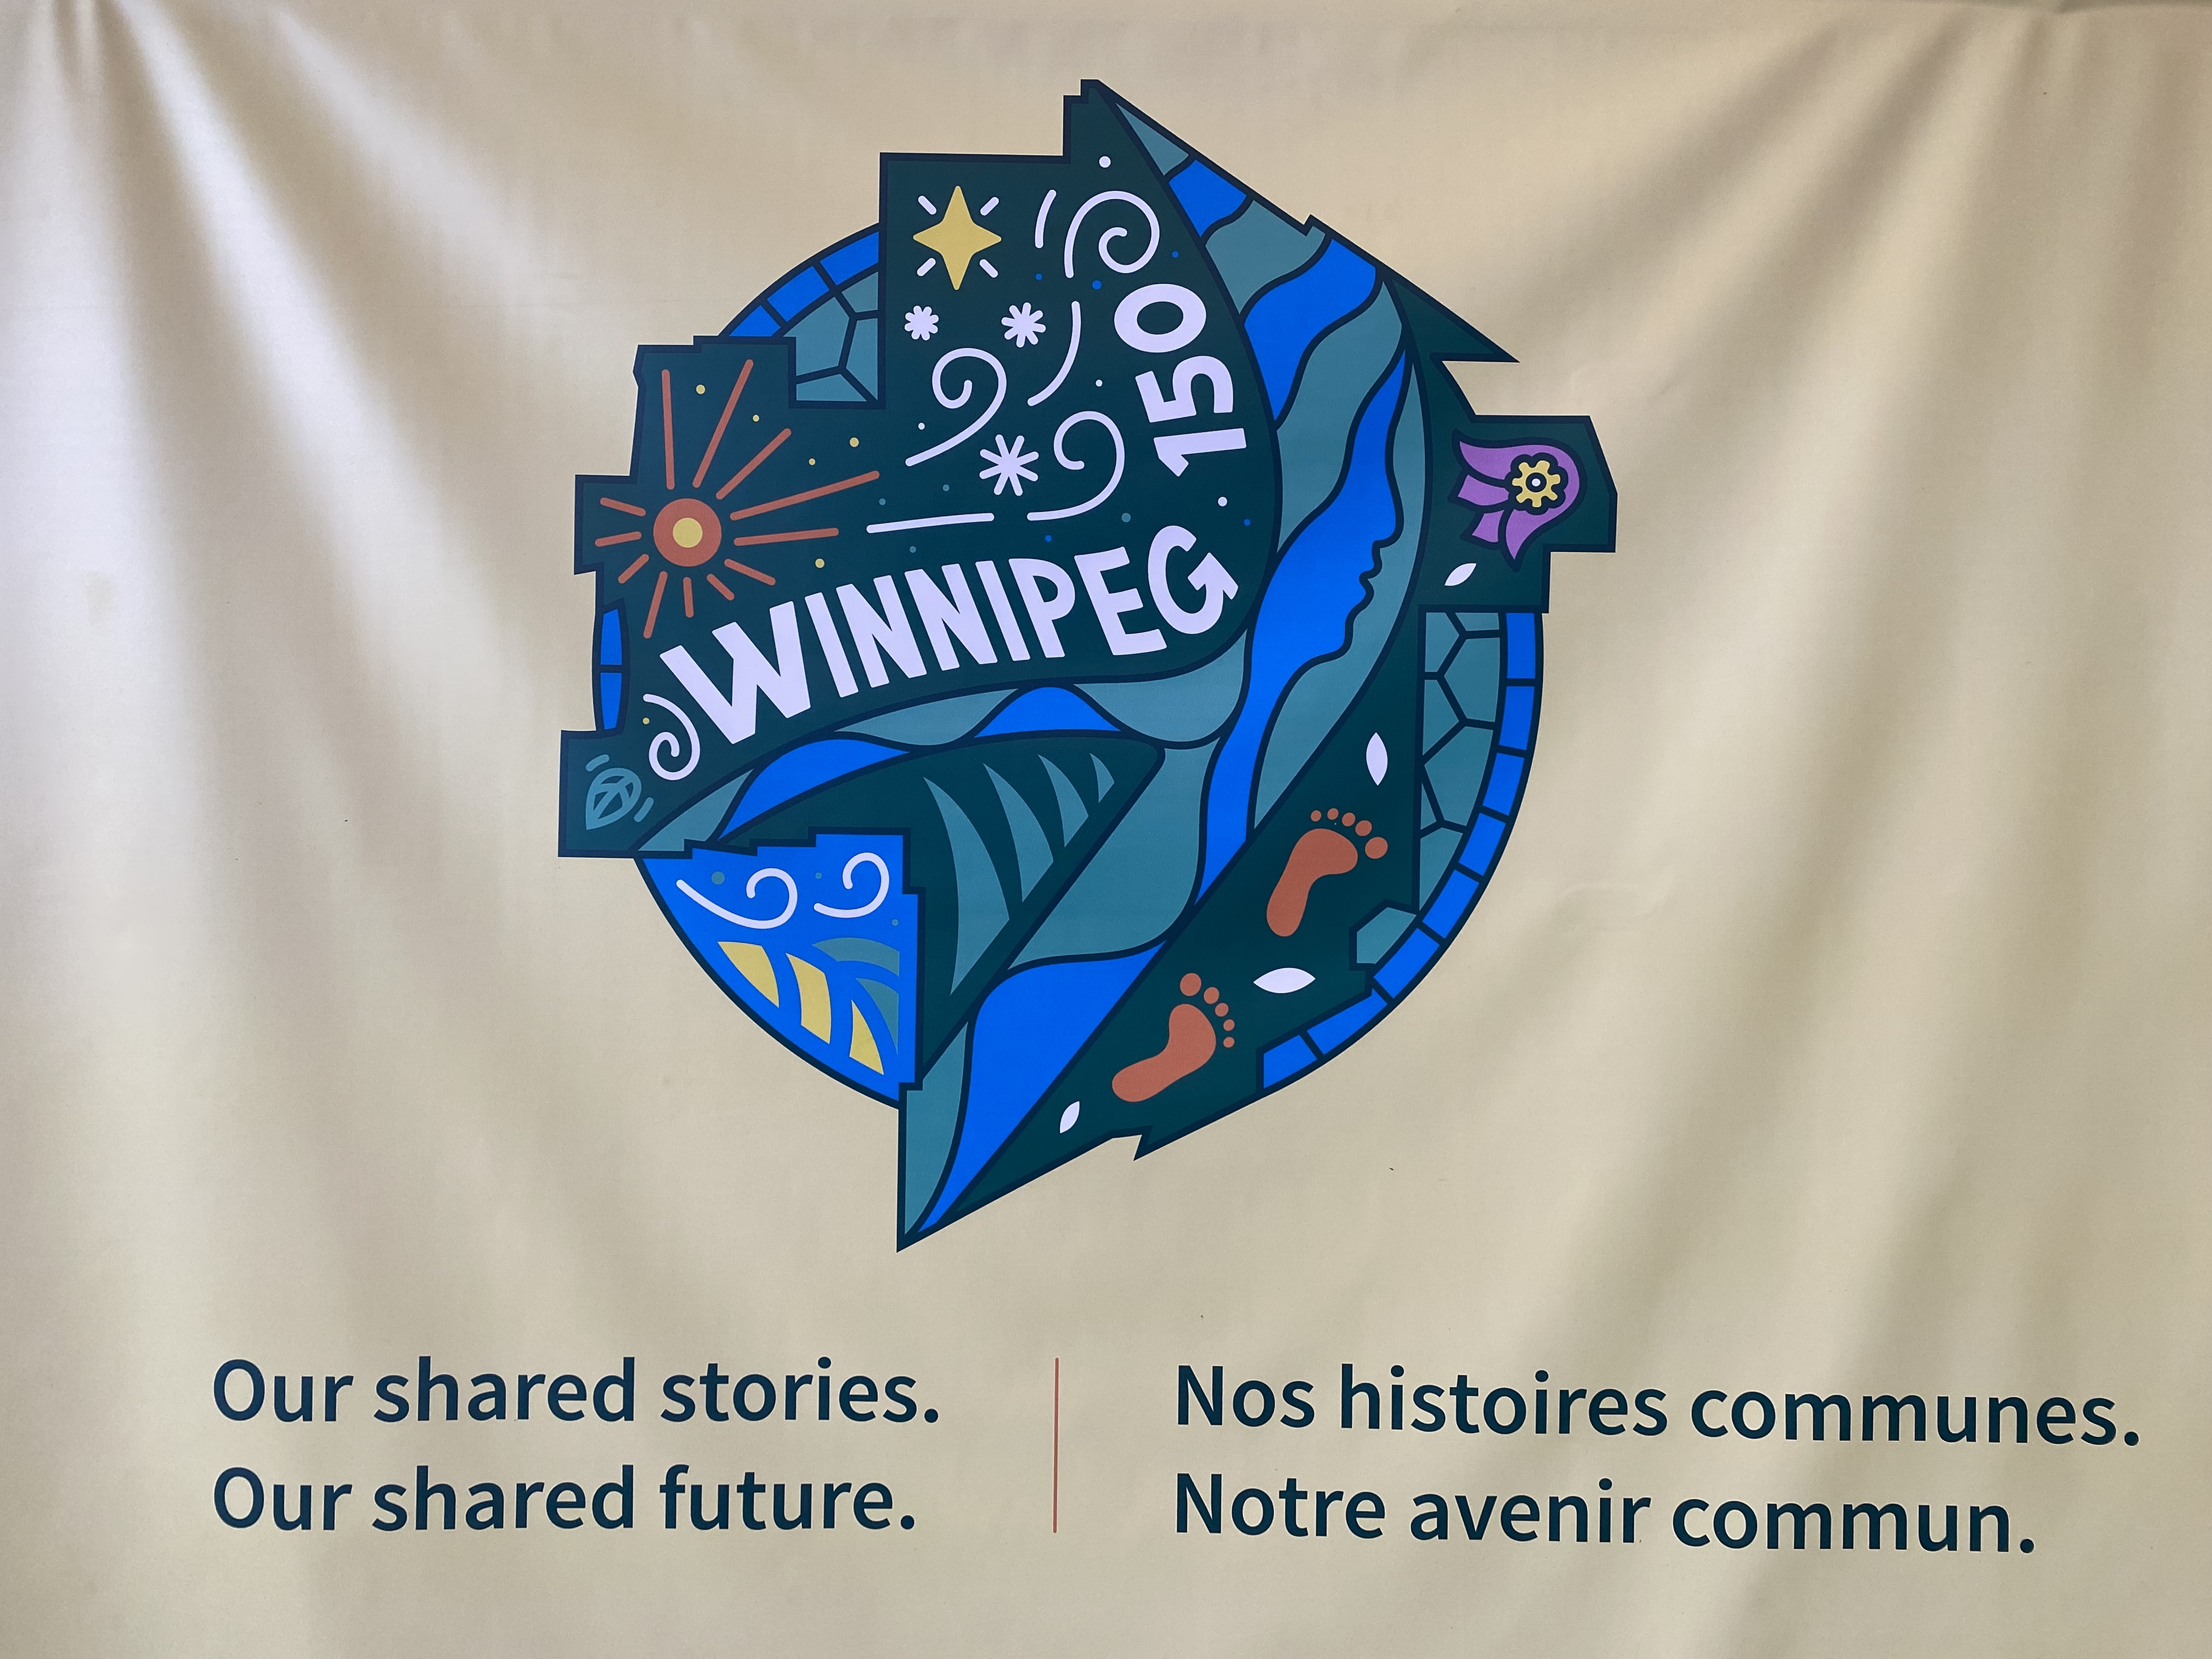 City of Winnipeg marks 150 years since first council meeting